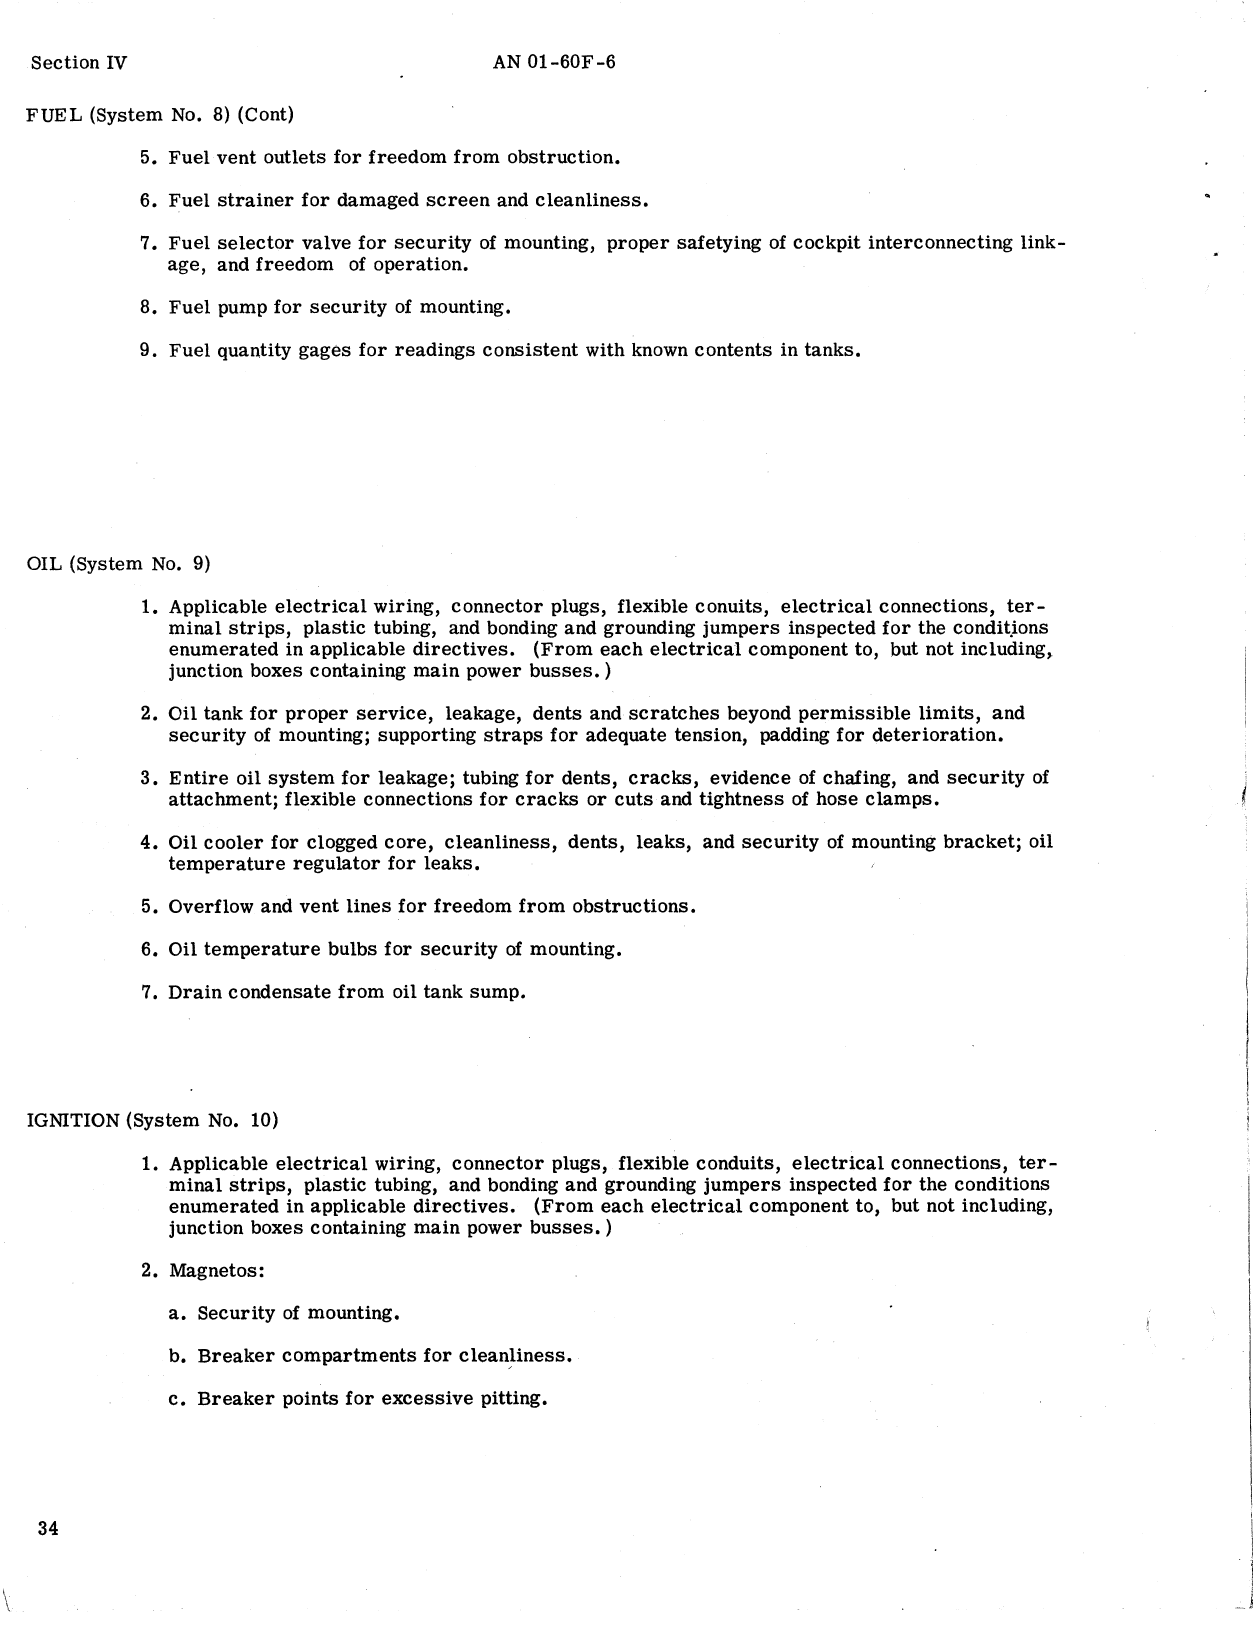 Sample page 36 from AirCorps Library document: Inspection Requirements T-6 / SNJ